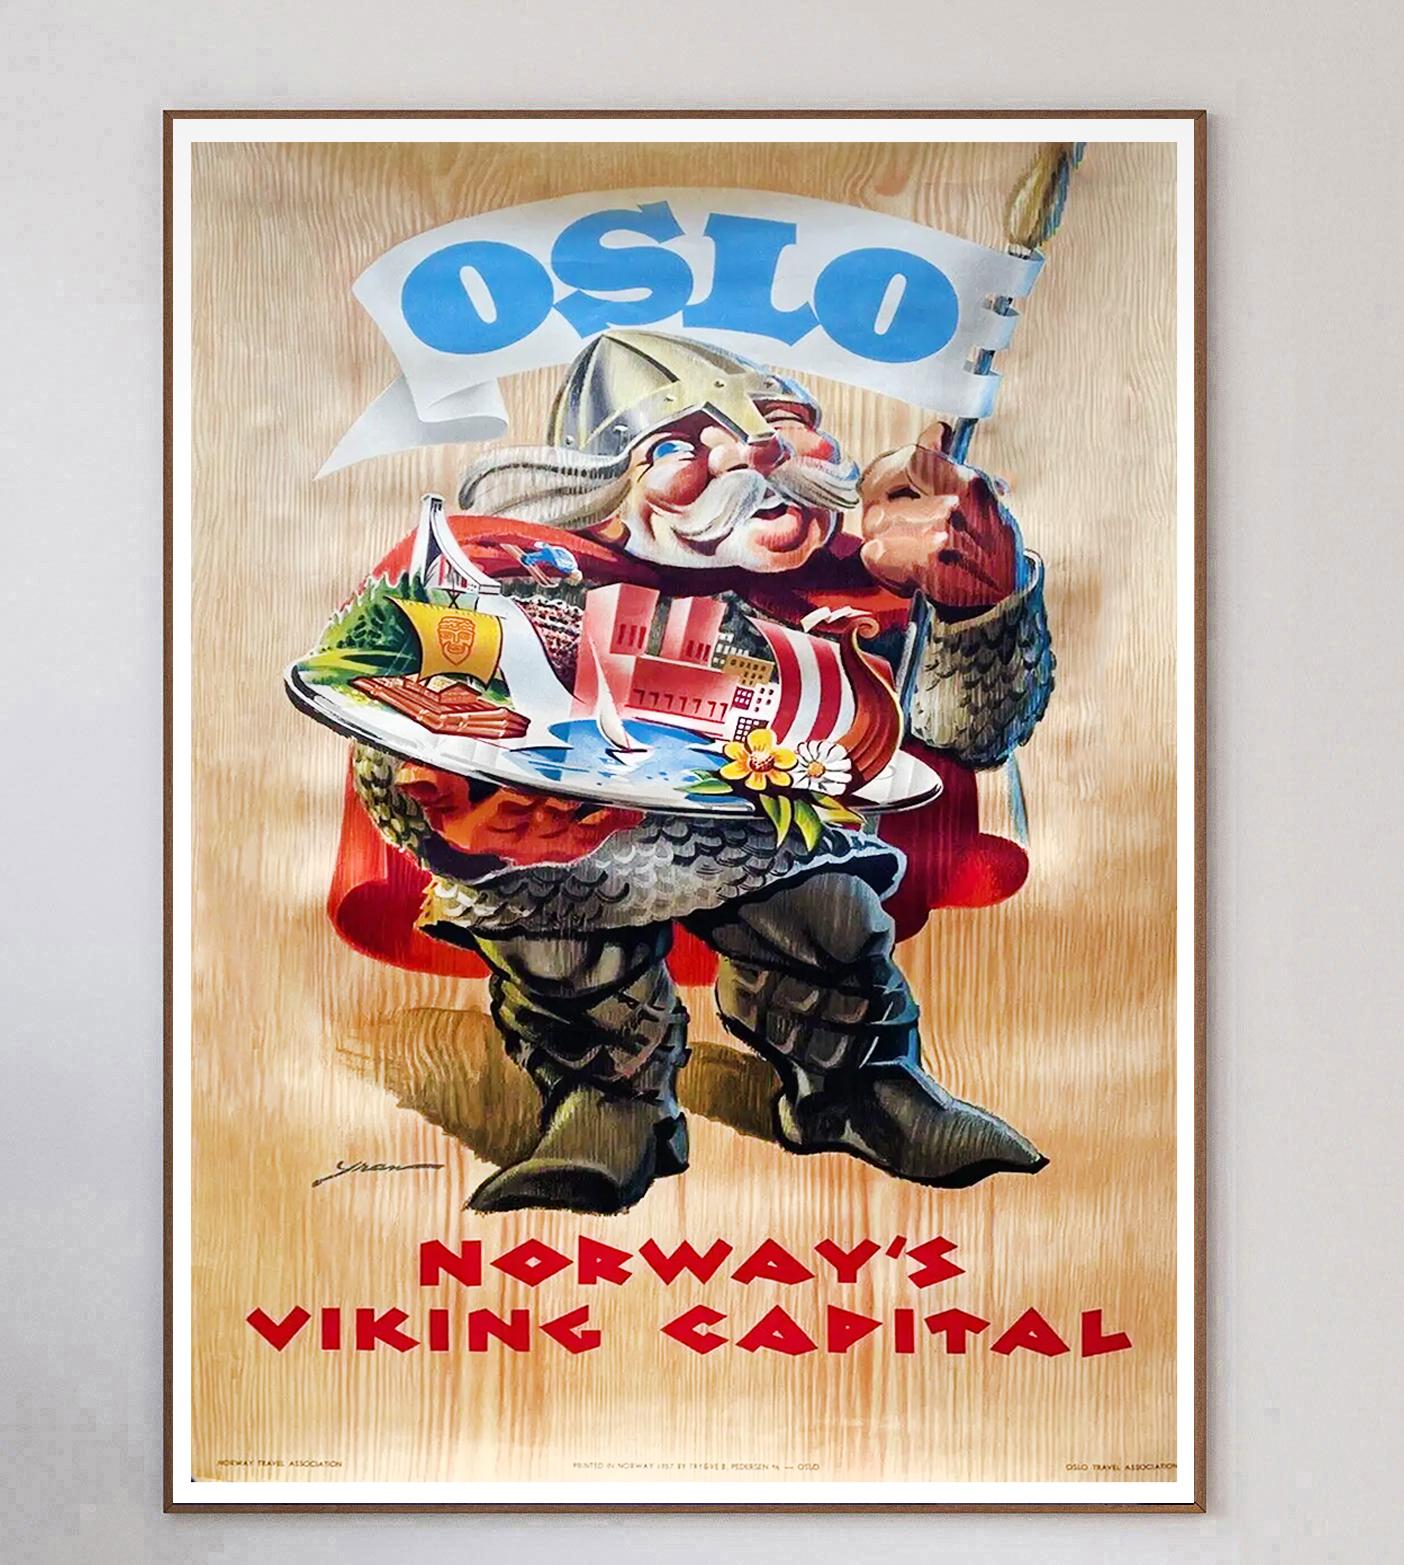 Depicting a happy viking holding some of the cities key landmarks, this poster was created in 1957 to promote tourism to Olso, the capital of Norway. Reading 